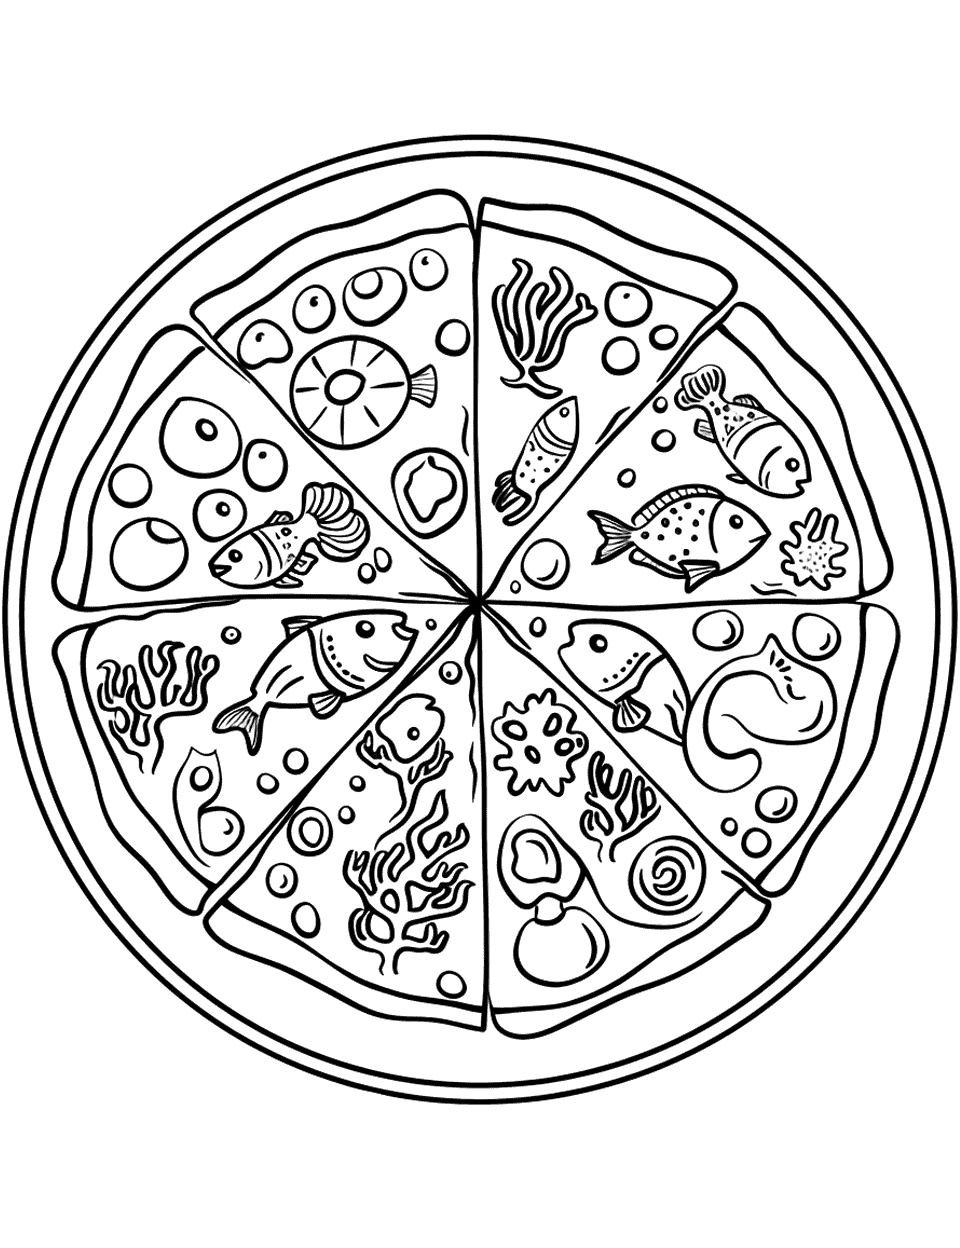 Sea Pizza Coloring Page - A pizza with fish and coral-shaped toppings.